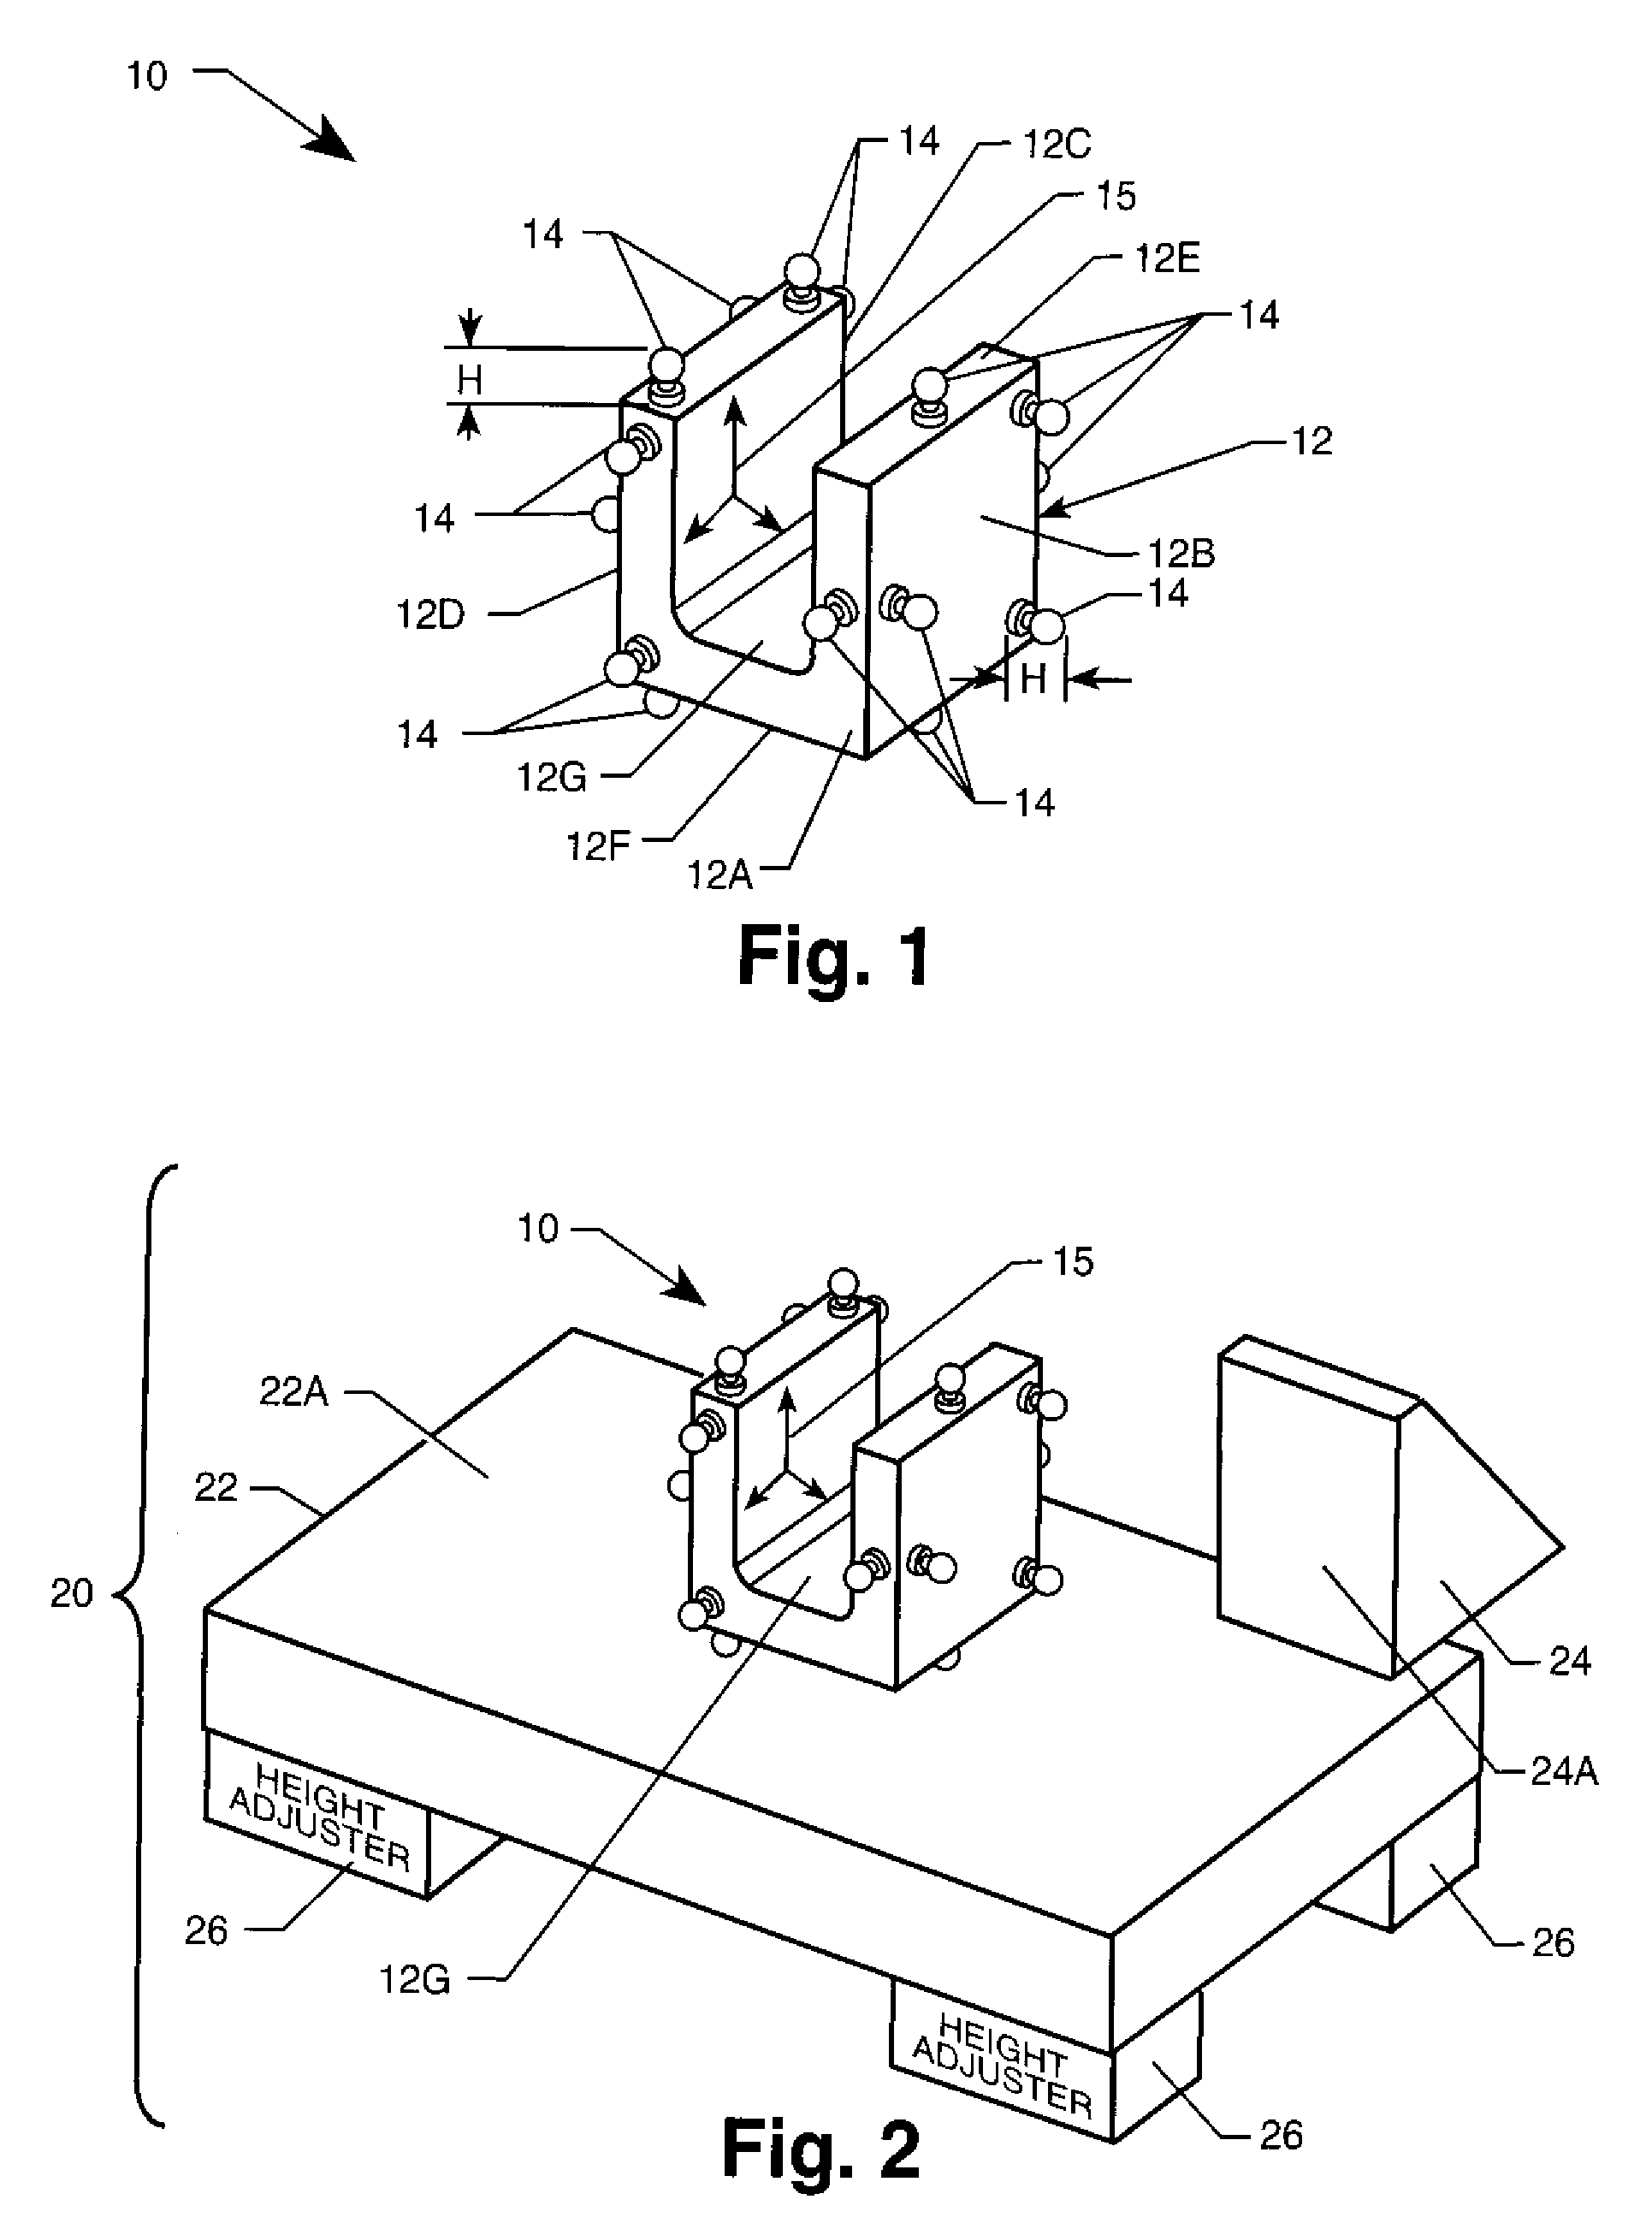 Positioning system for single or multi-axis sensitive instrument calibration and calibration system for use therewith